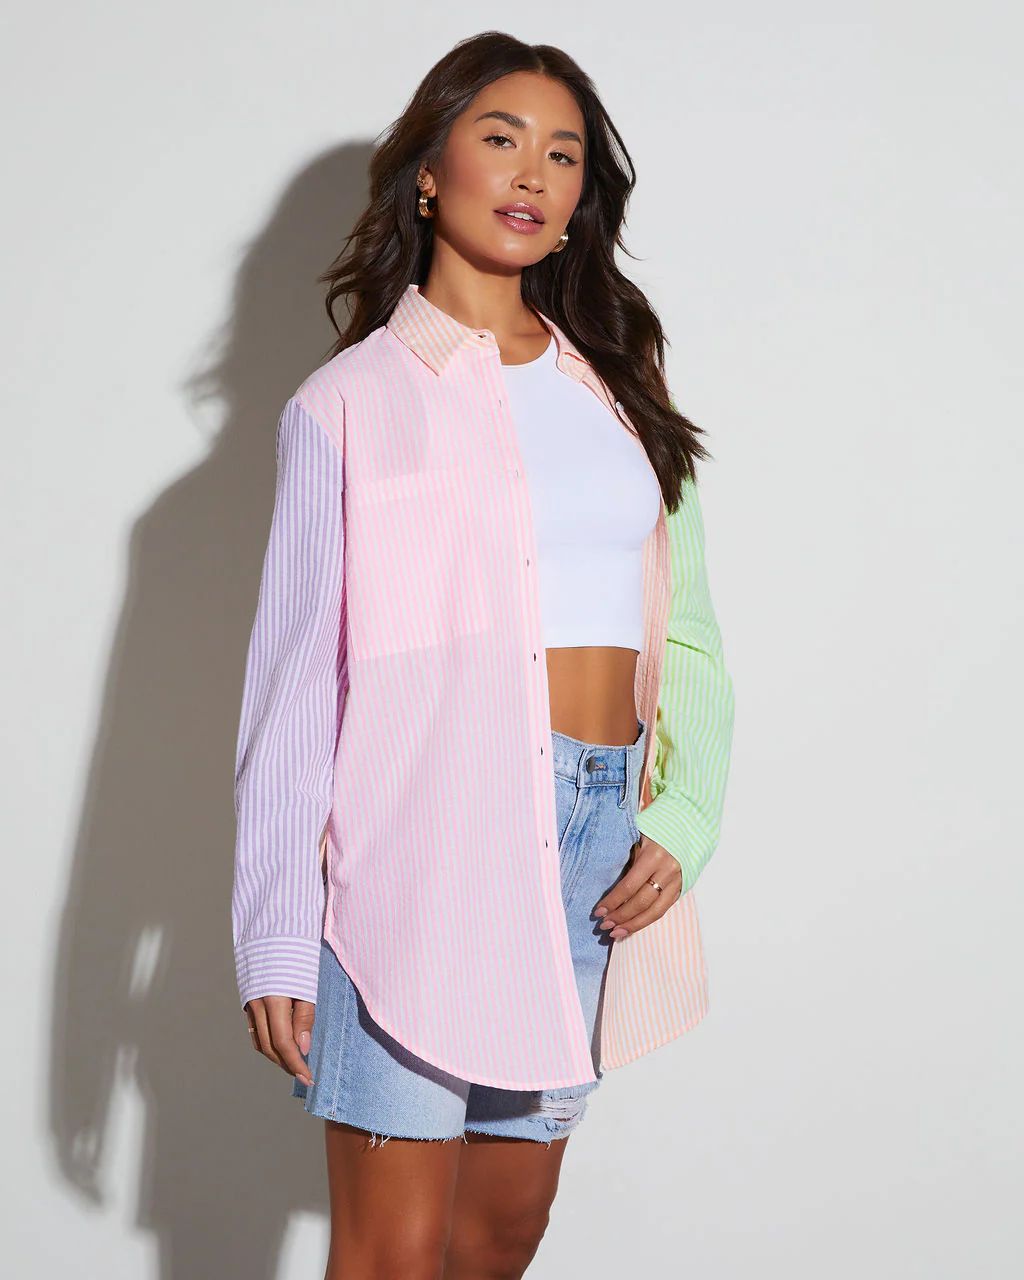 Blakelyn Cotton Blend Striped Colorblock Button Down Top | VICI Collection